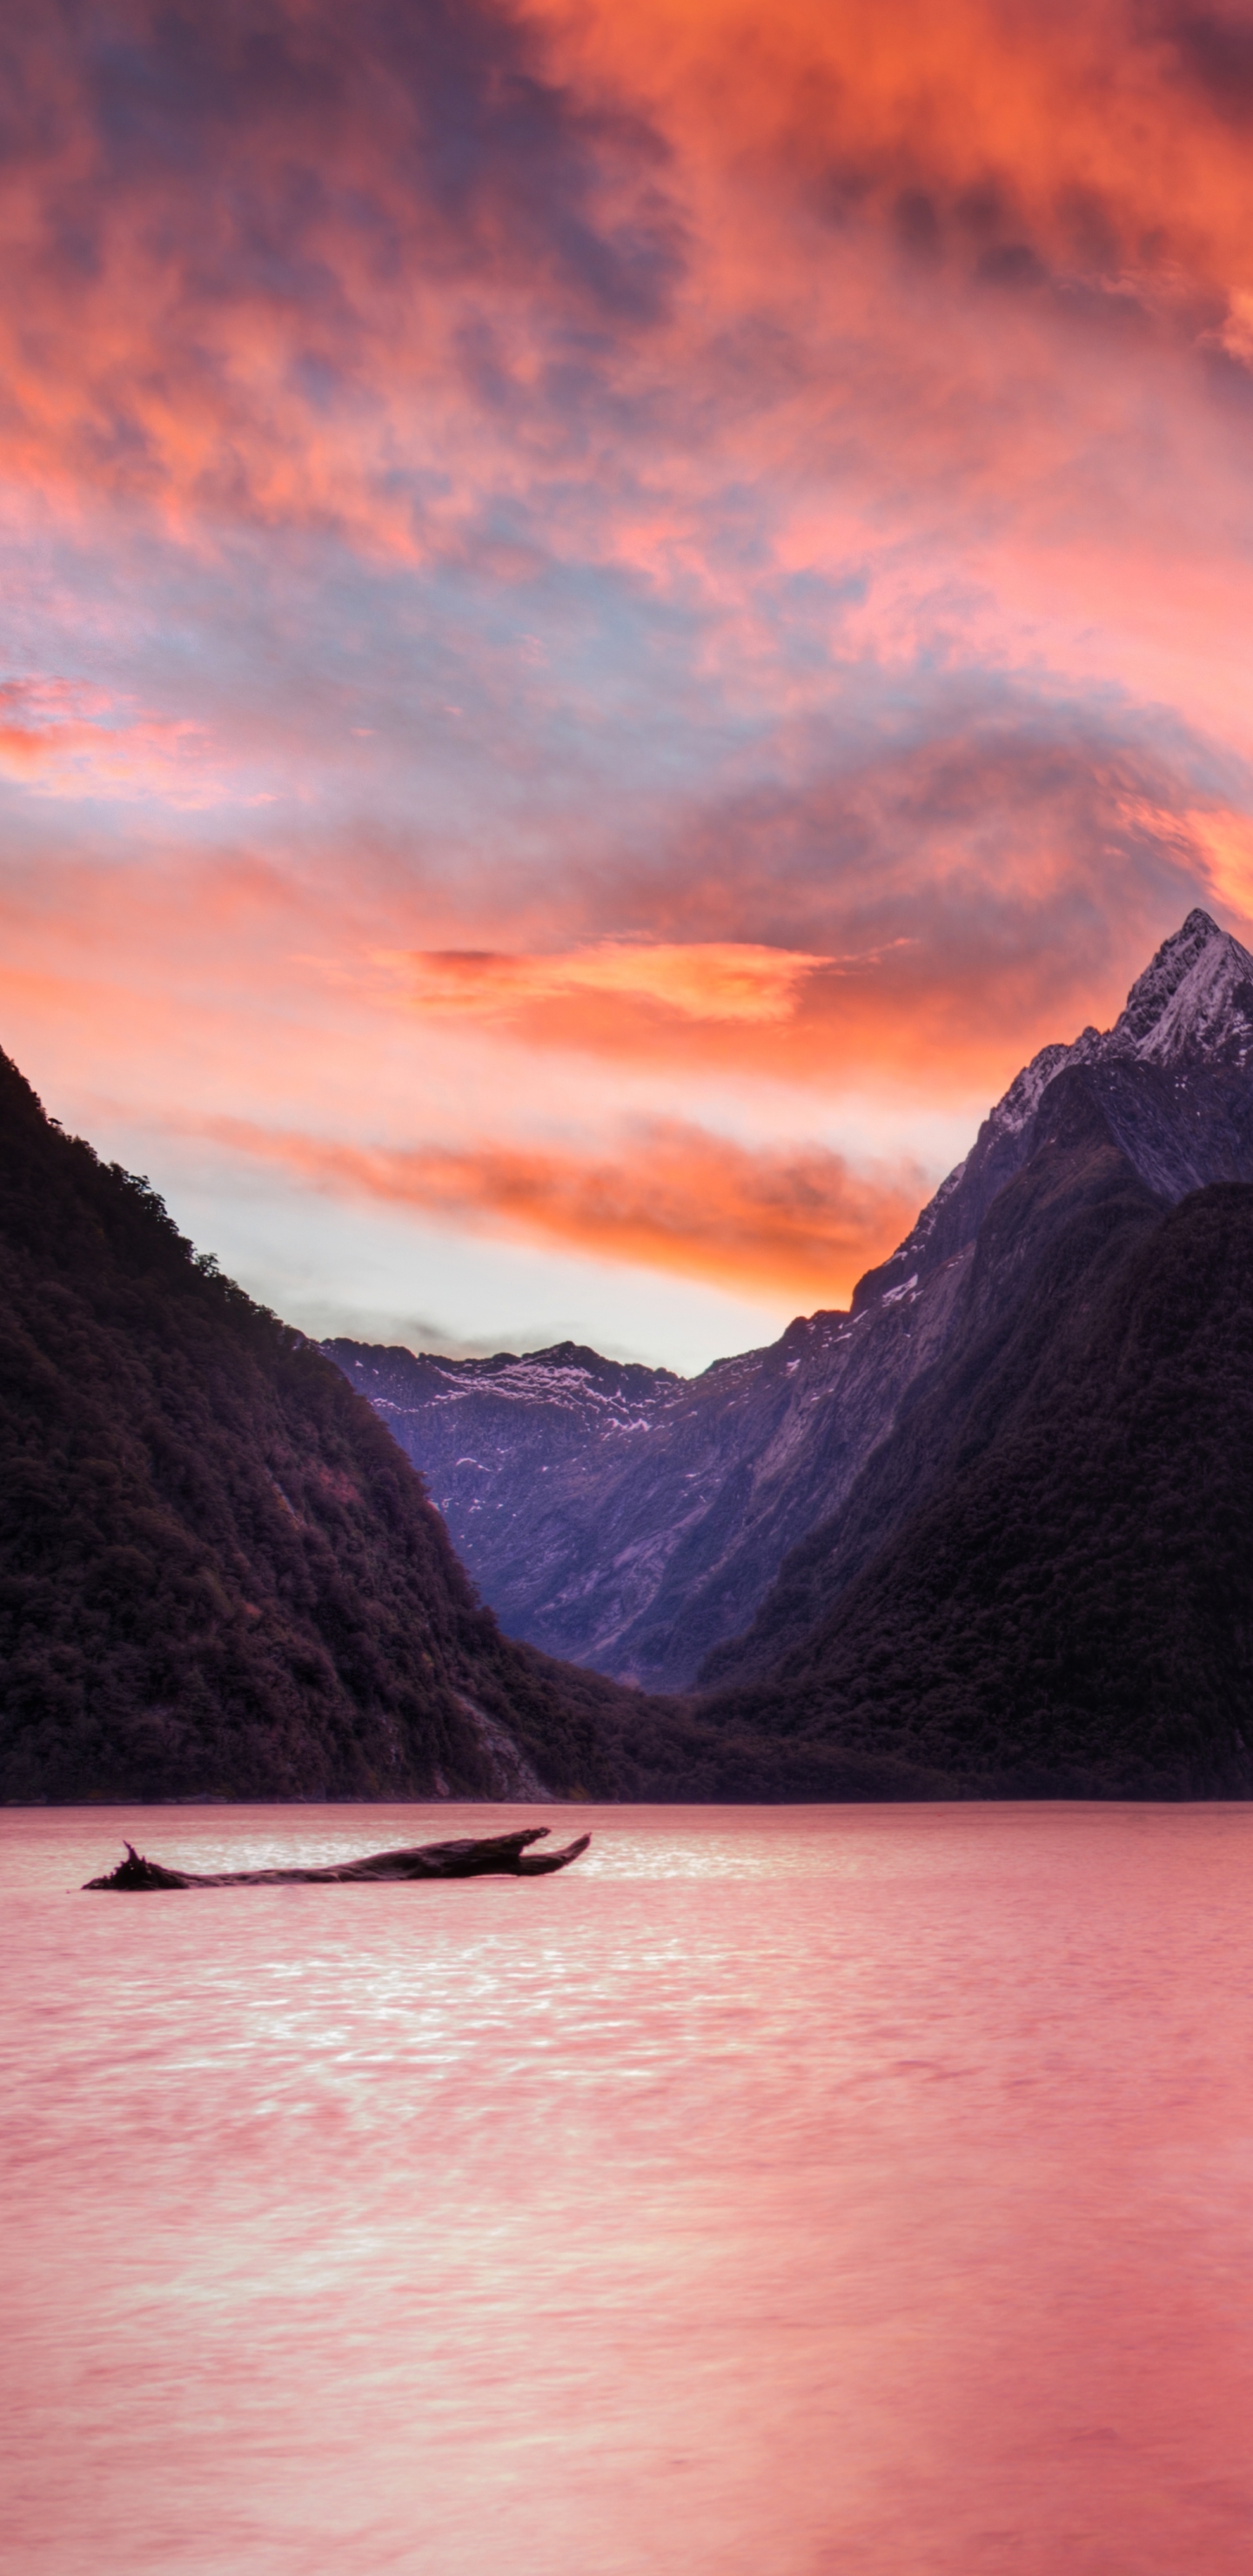 earth, milford sound, nature, driftwood, fjord, sunset, mitre peak, new zealand, mountain, cloud, sky